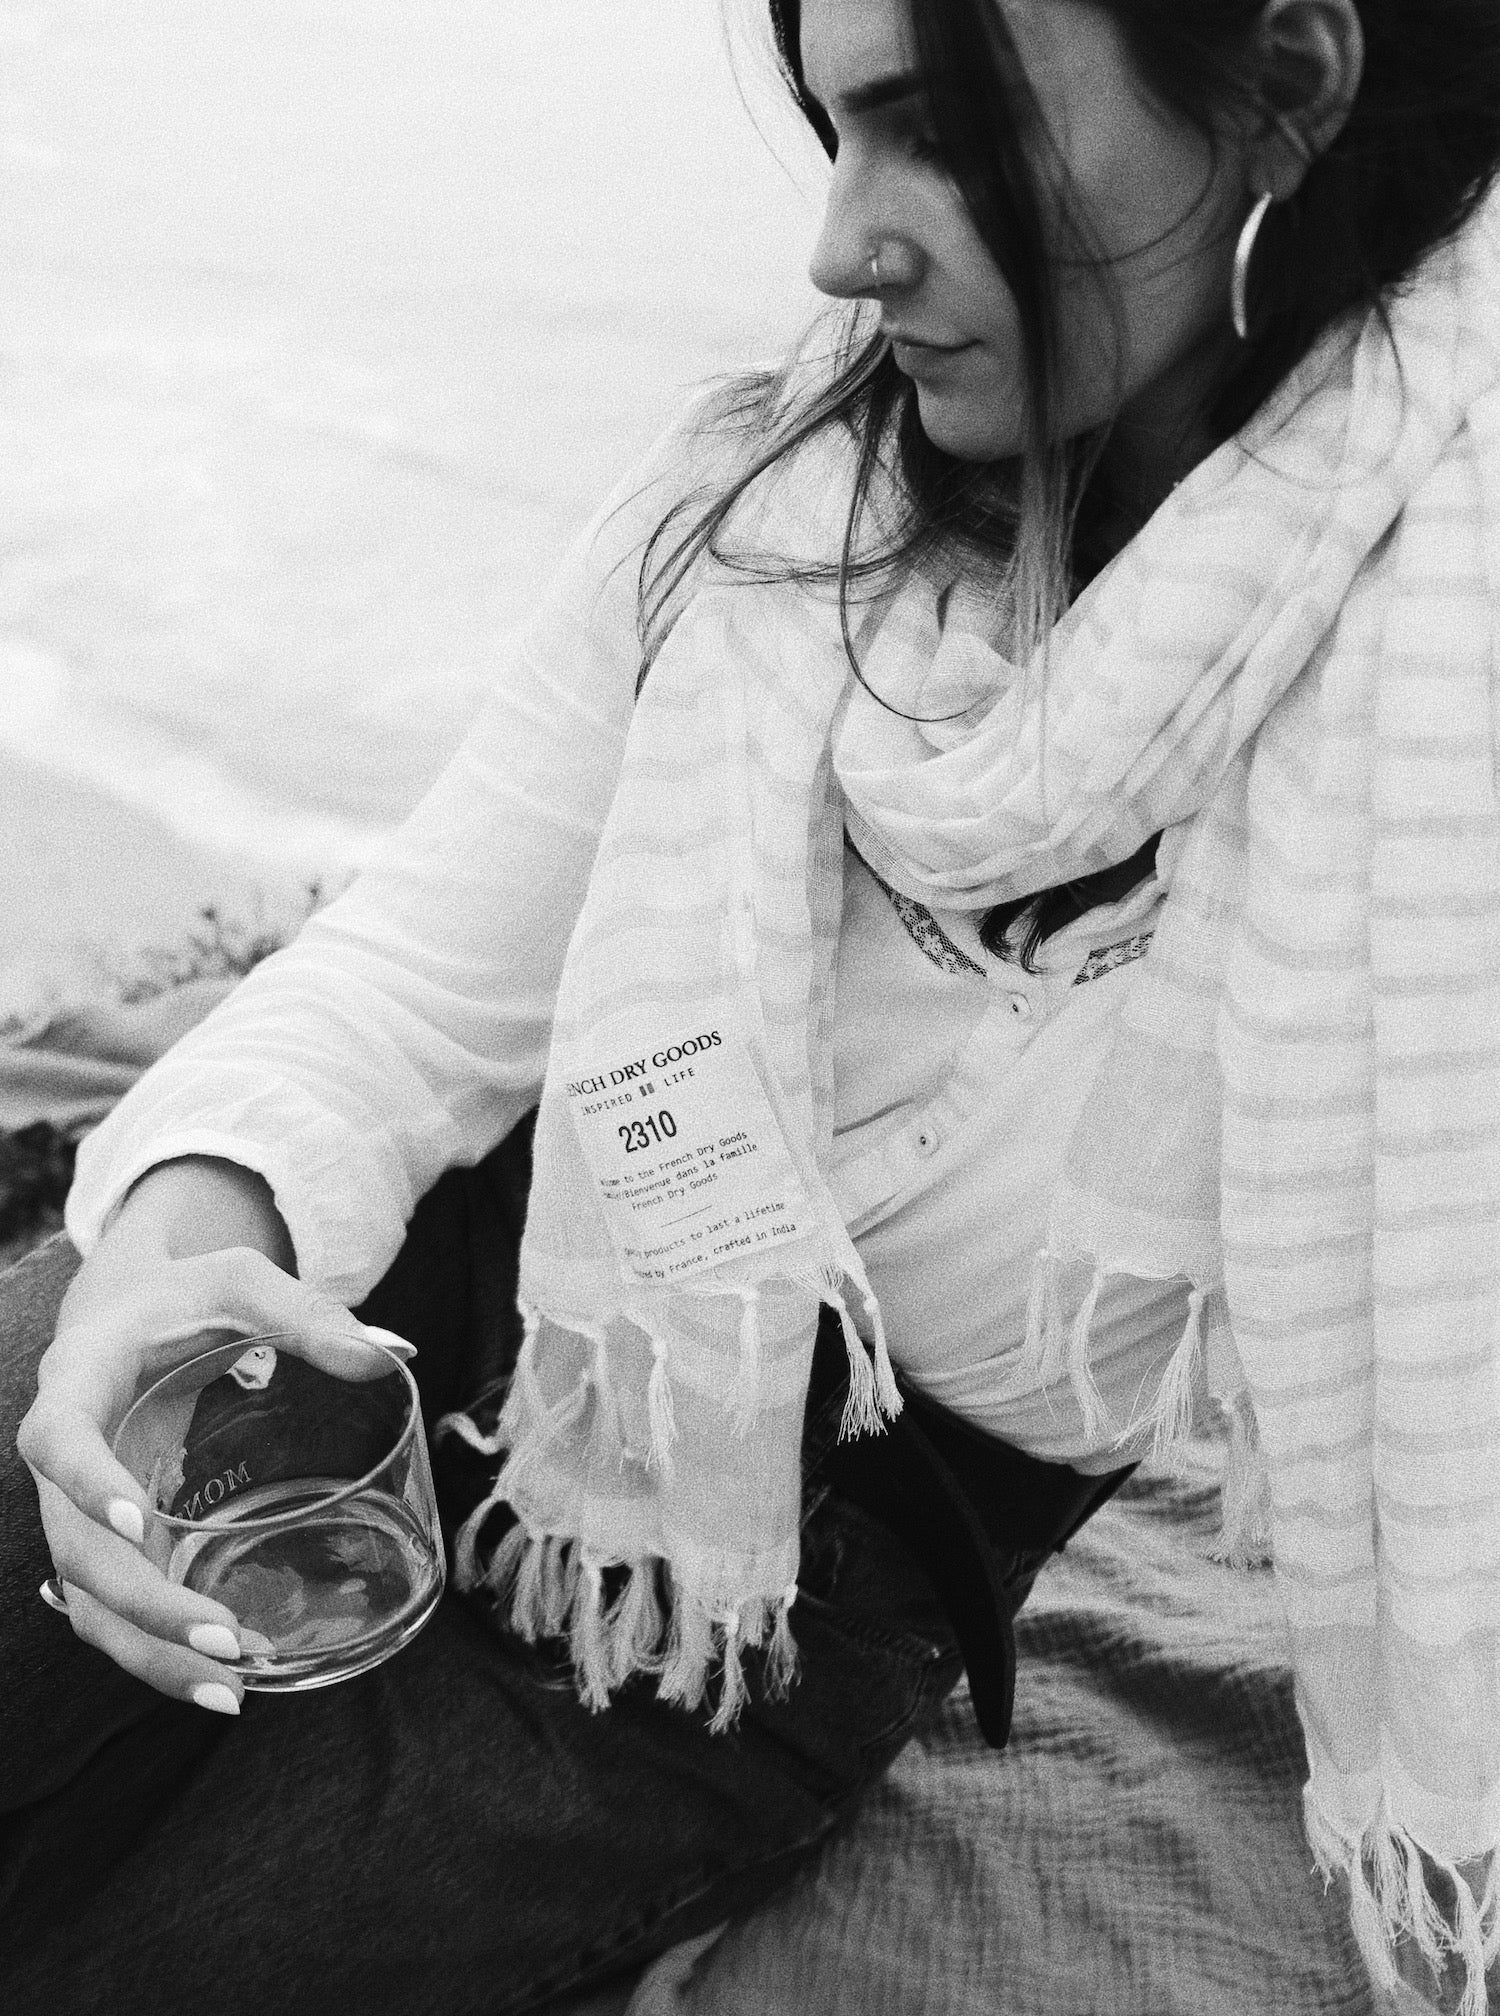 A black and white image of a seated woman in a white blouse and jeans, holding a clear glass in her hand. She is wearing a striped scarf with a visible label and tassel edges, looking downwards.